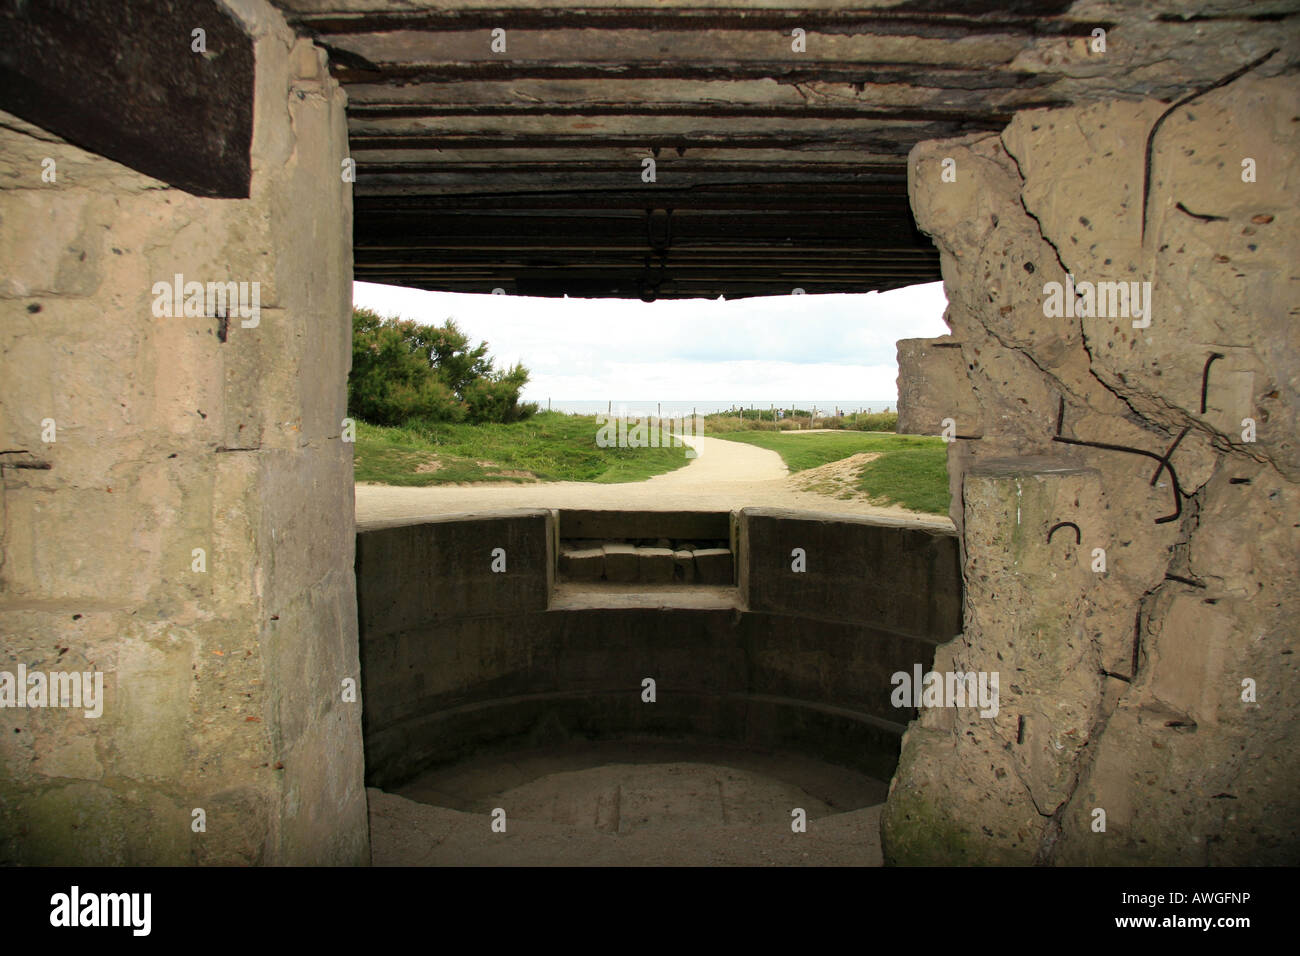 The view from inside an artillary encasement at Point du Hoc looking out across the Englich Channel. Stock Photo